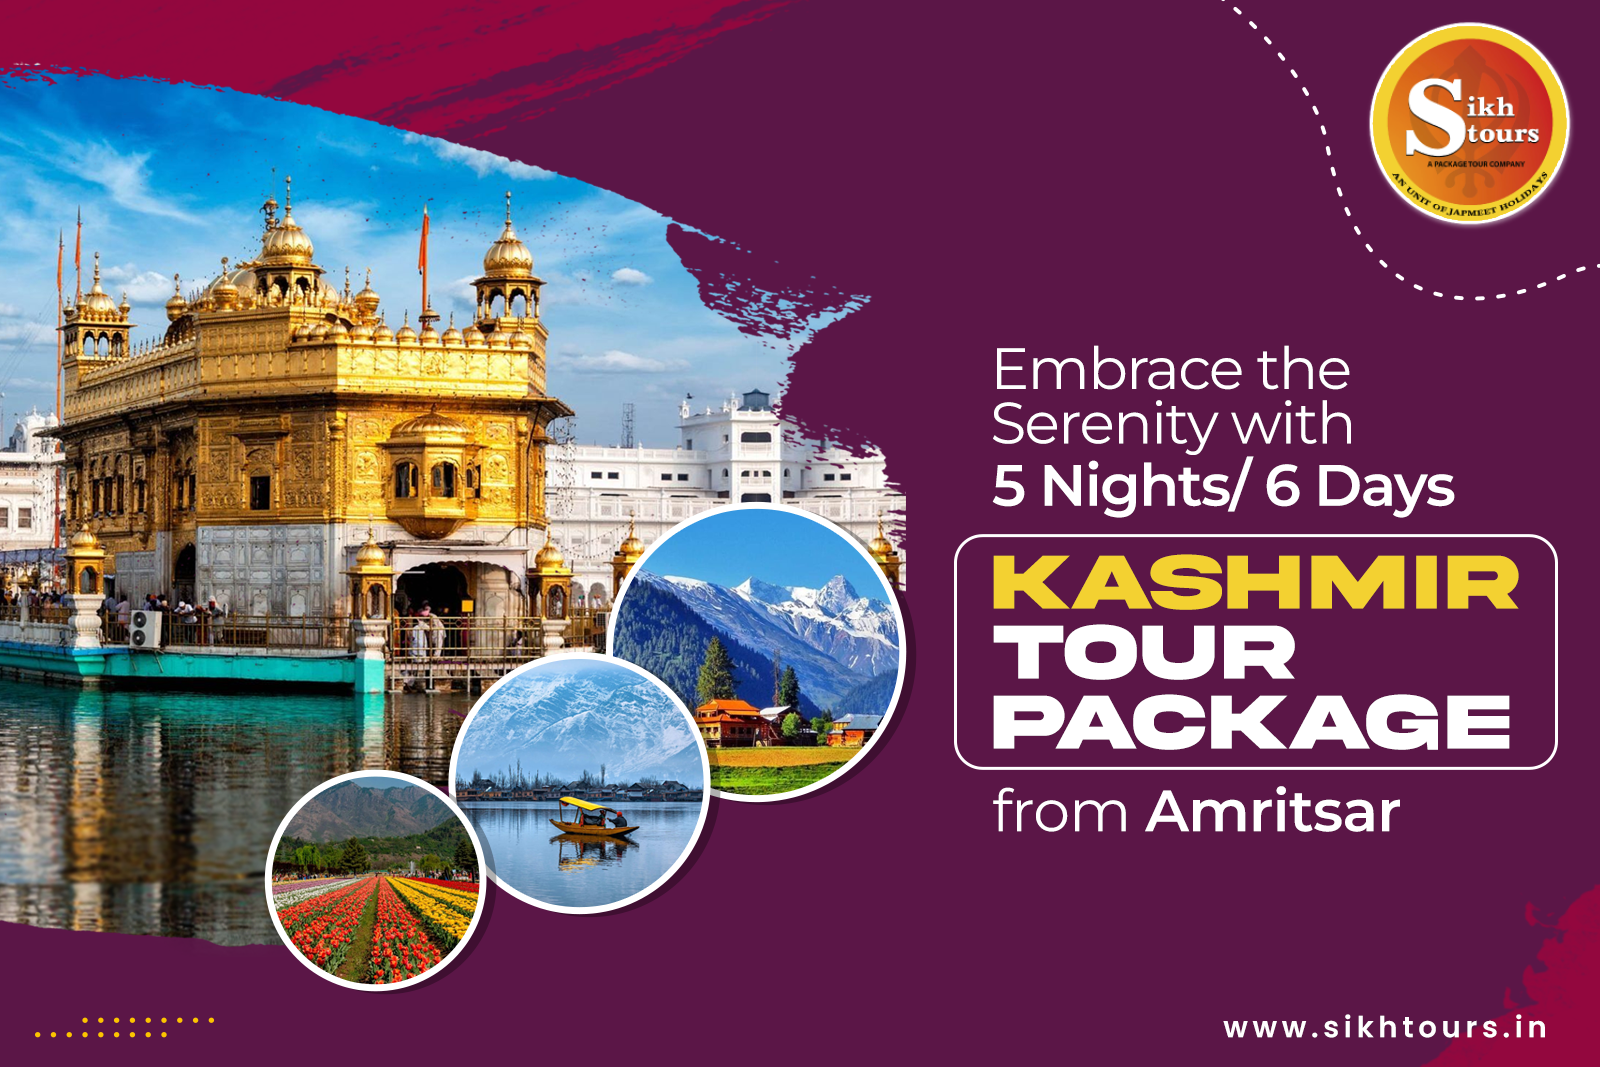 Embrace the Serenity with 5 Nights/ 6 Days Kashmir Tour Package from Amritsar